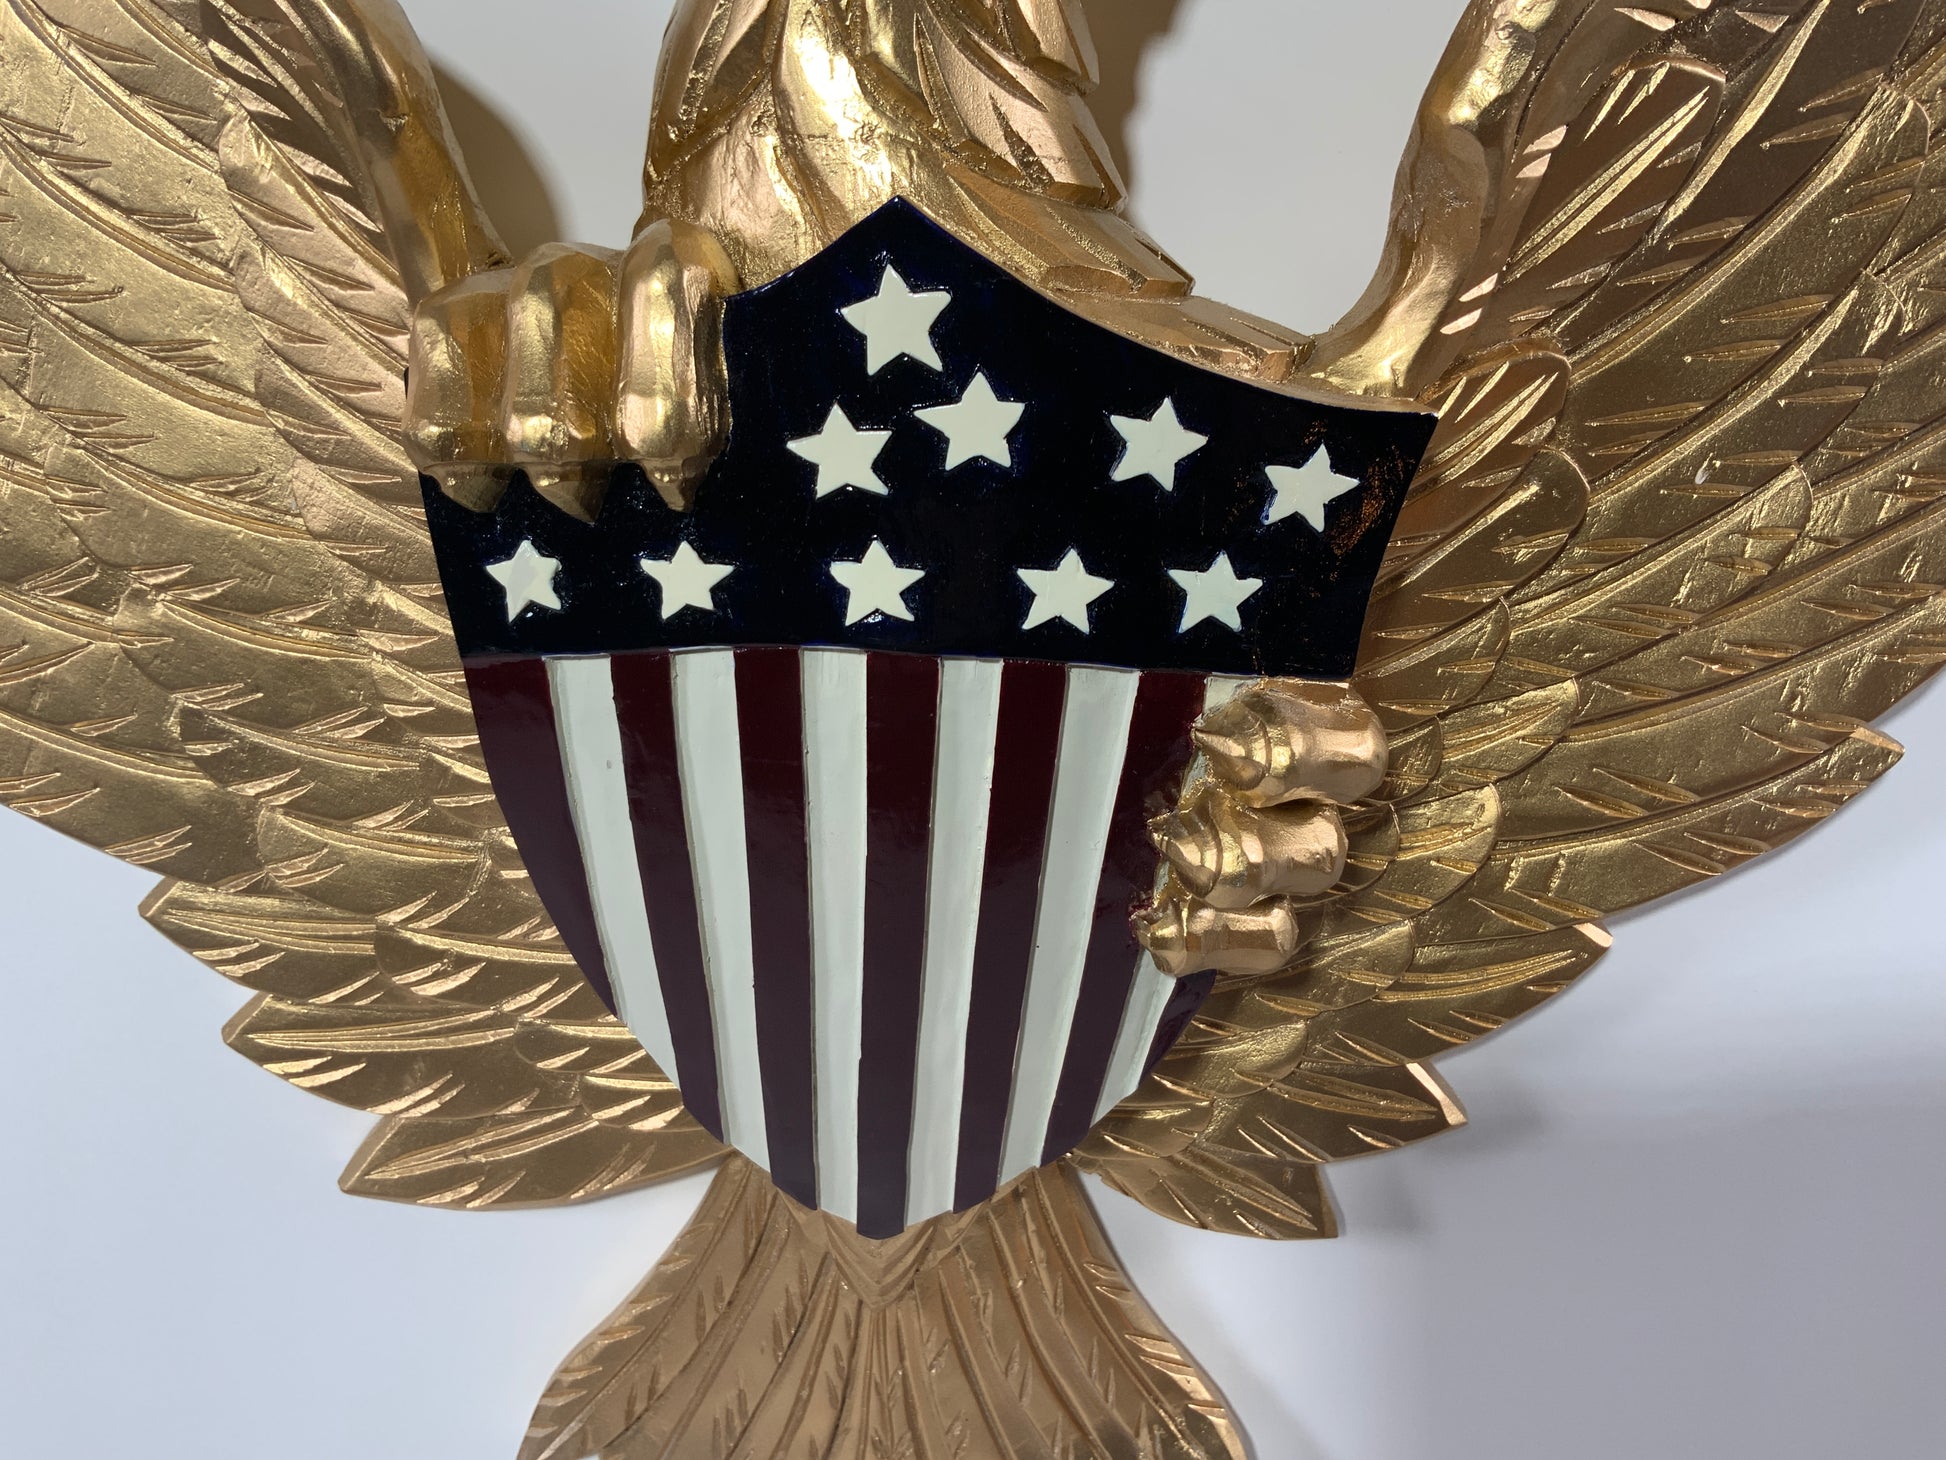 Gold Federal Carved Eagle - Lannan Gallery